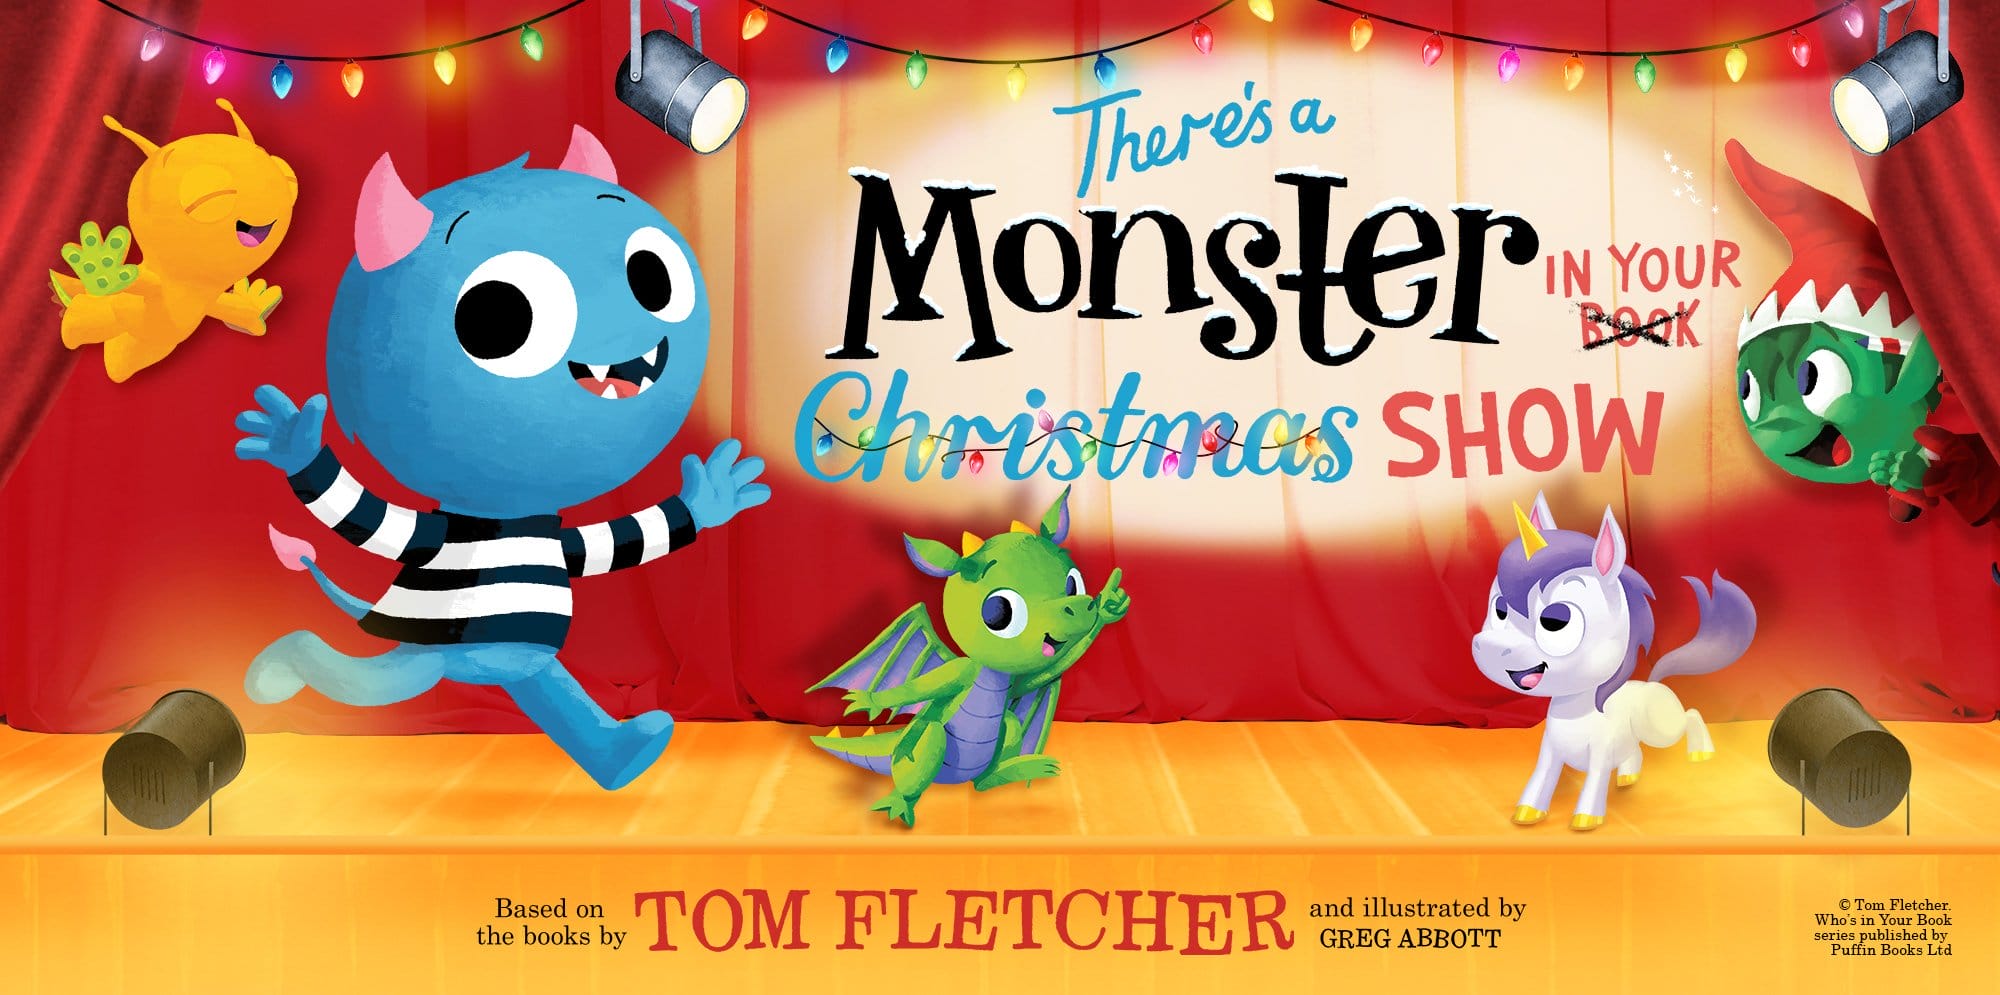 Cartoon creatures including a unicorn, dragon, alien, elf and a monster stand of a stage. Text reads ' There's a Monster in your Christmas Show